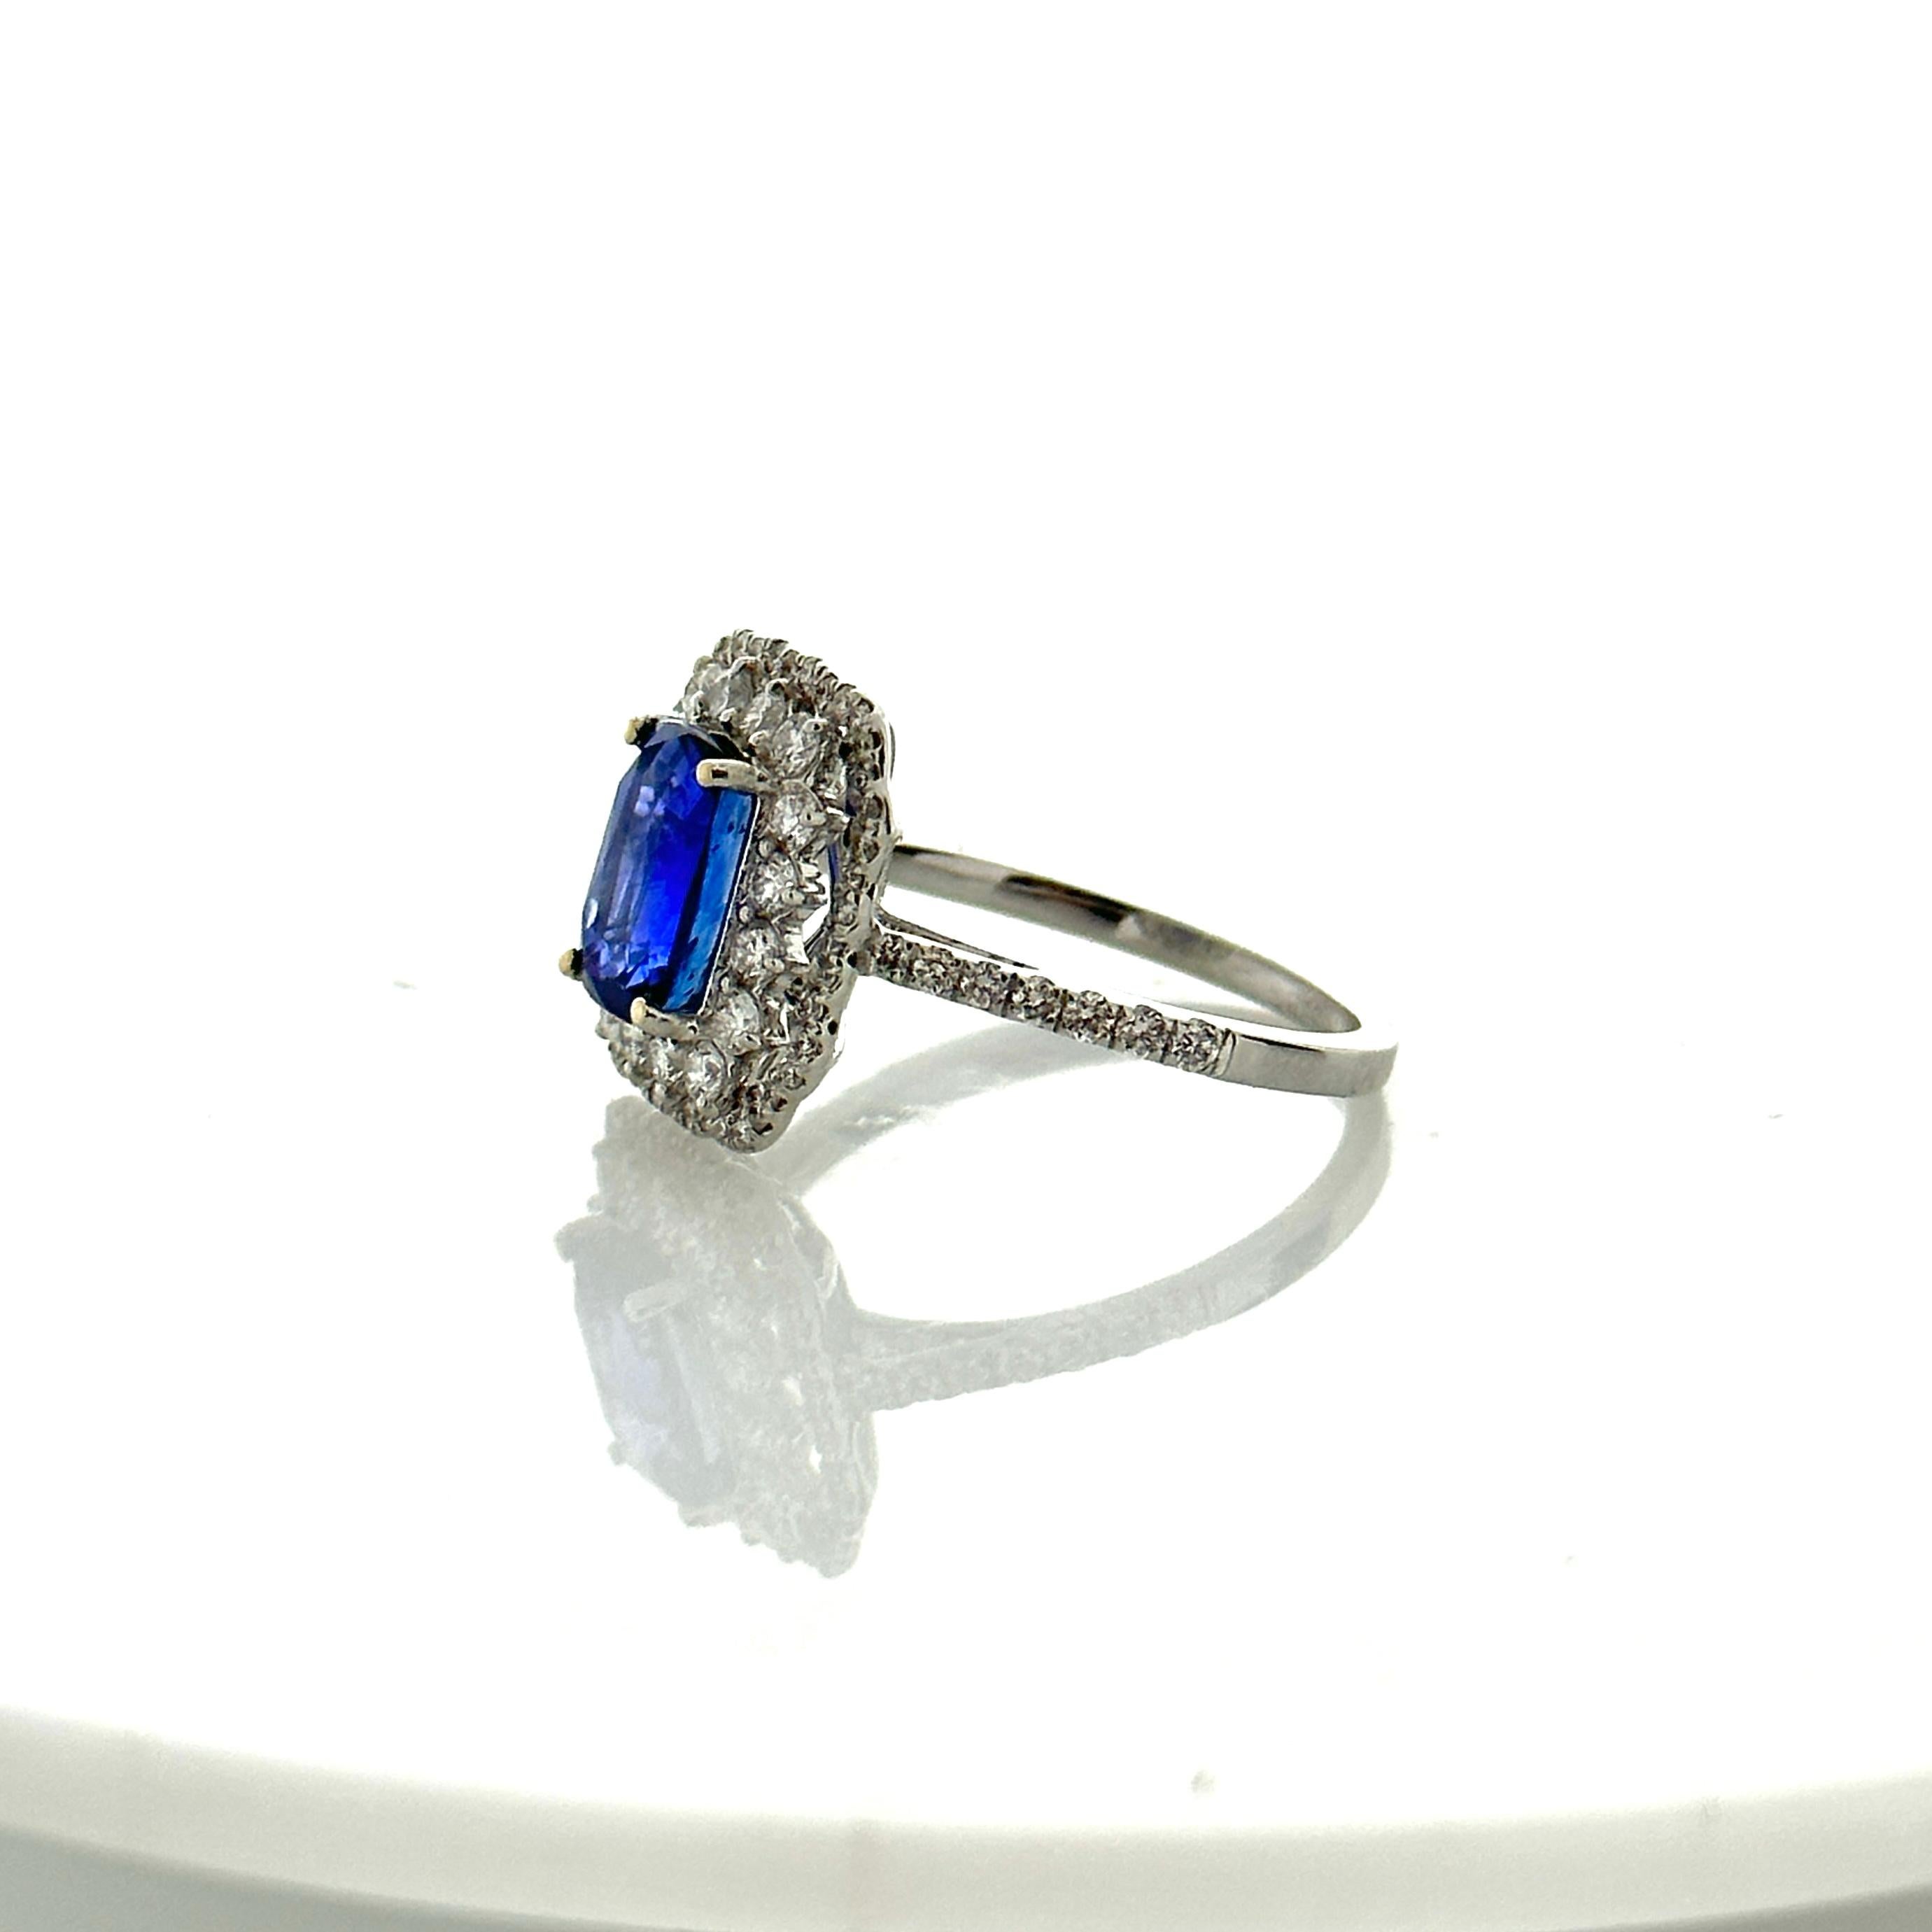 This is a 2.07 carats royal blue sapphire that is surrounded by a stunning halo of round brilliant diamonds. The sapphire is from Sri Lanka. The color is royal blue; its luster, clarity, and transparency are exceptional. The 0.73 carat total weight